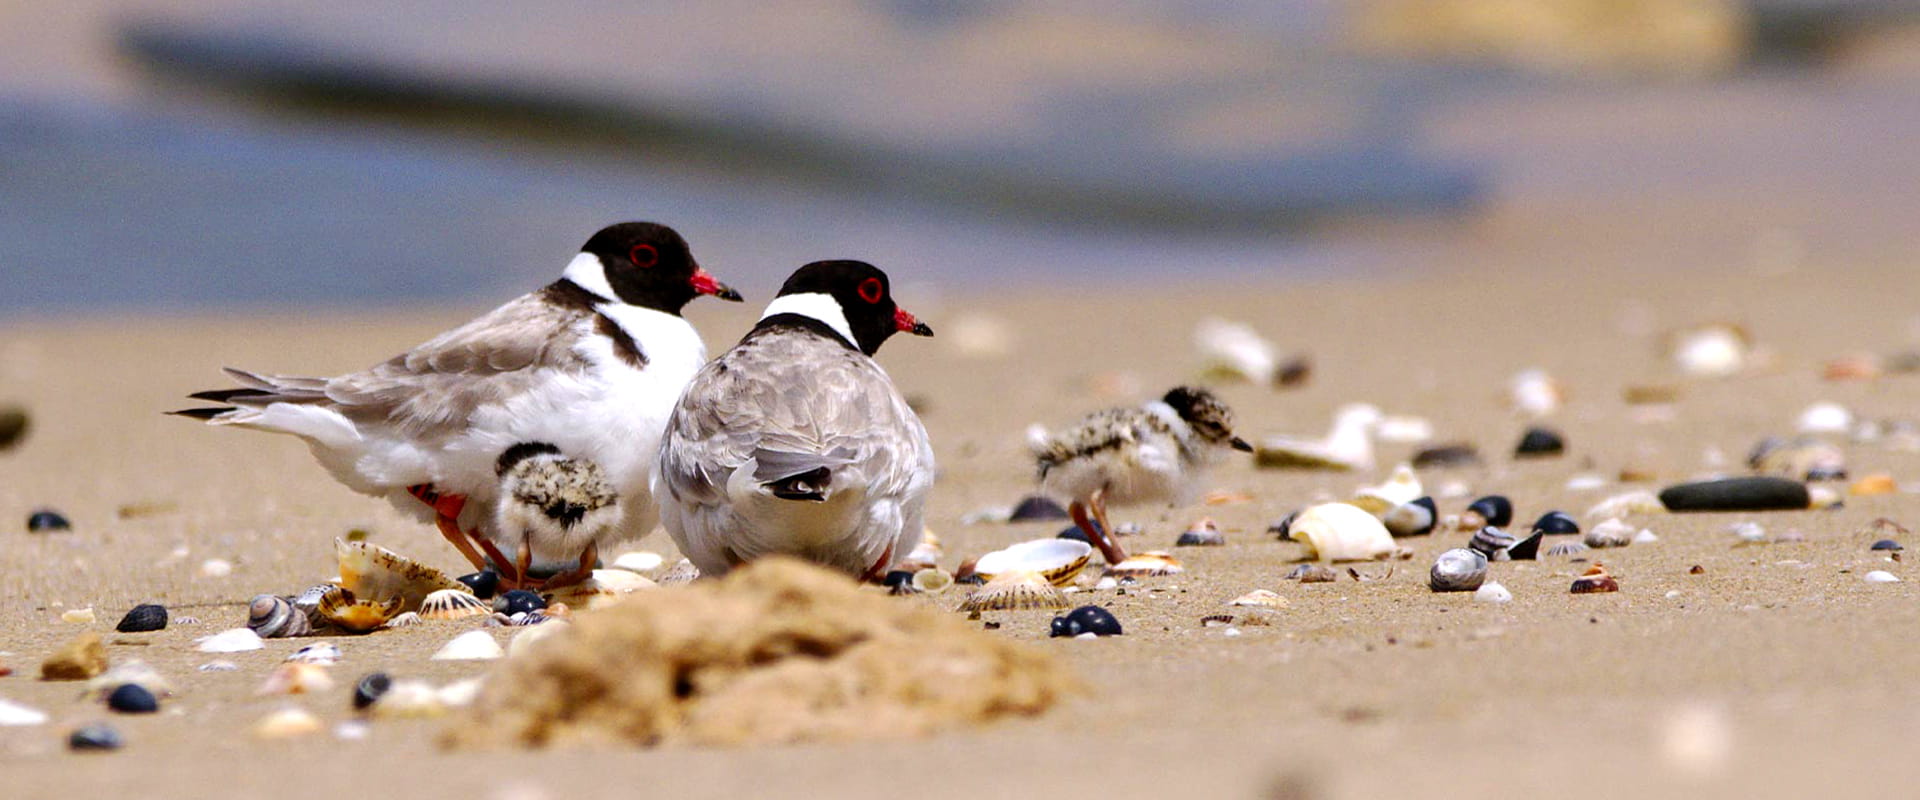 Two hooded plovers watch over their two hatchlings as they explore the seashells nestled in the sand.